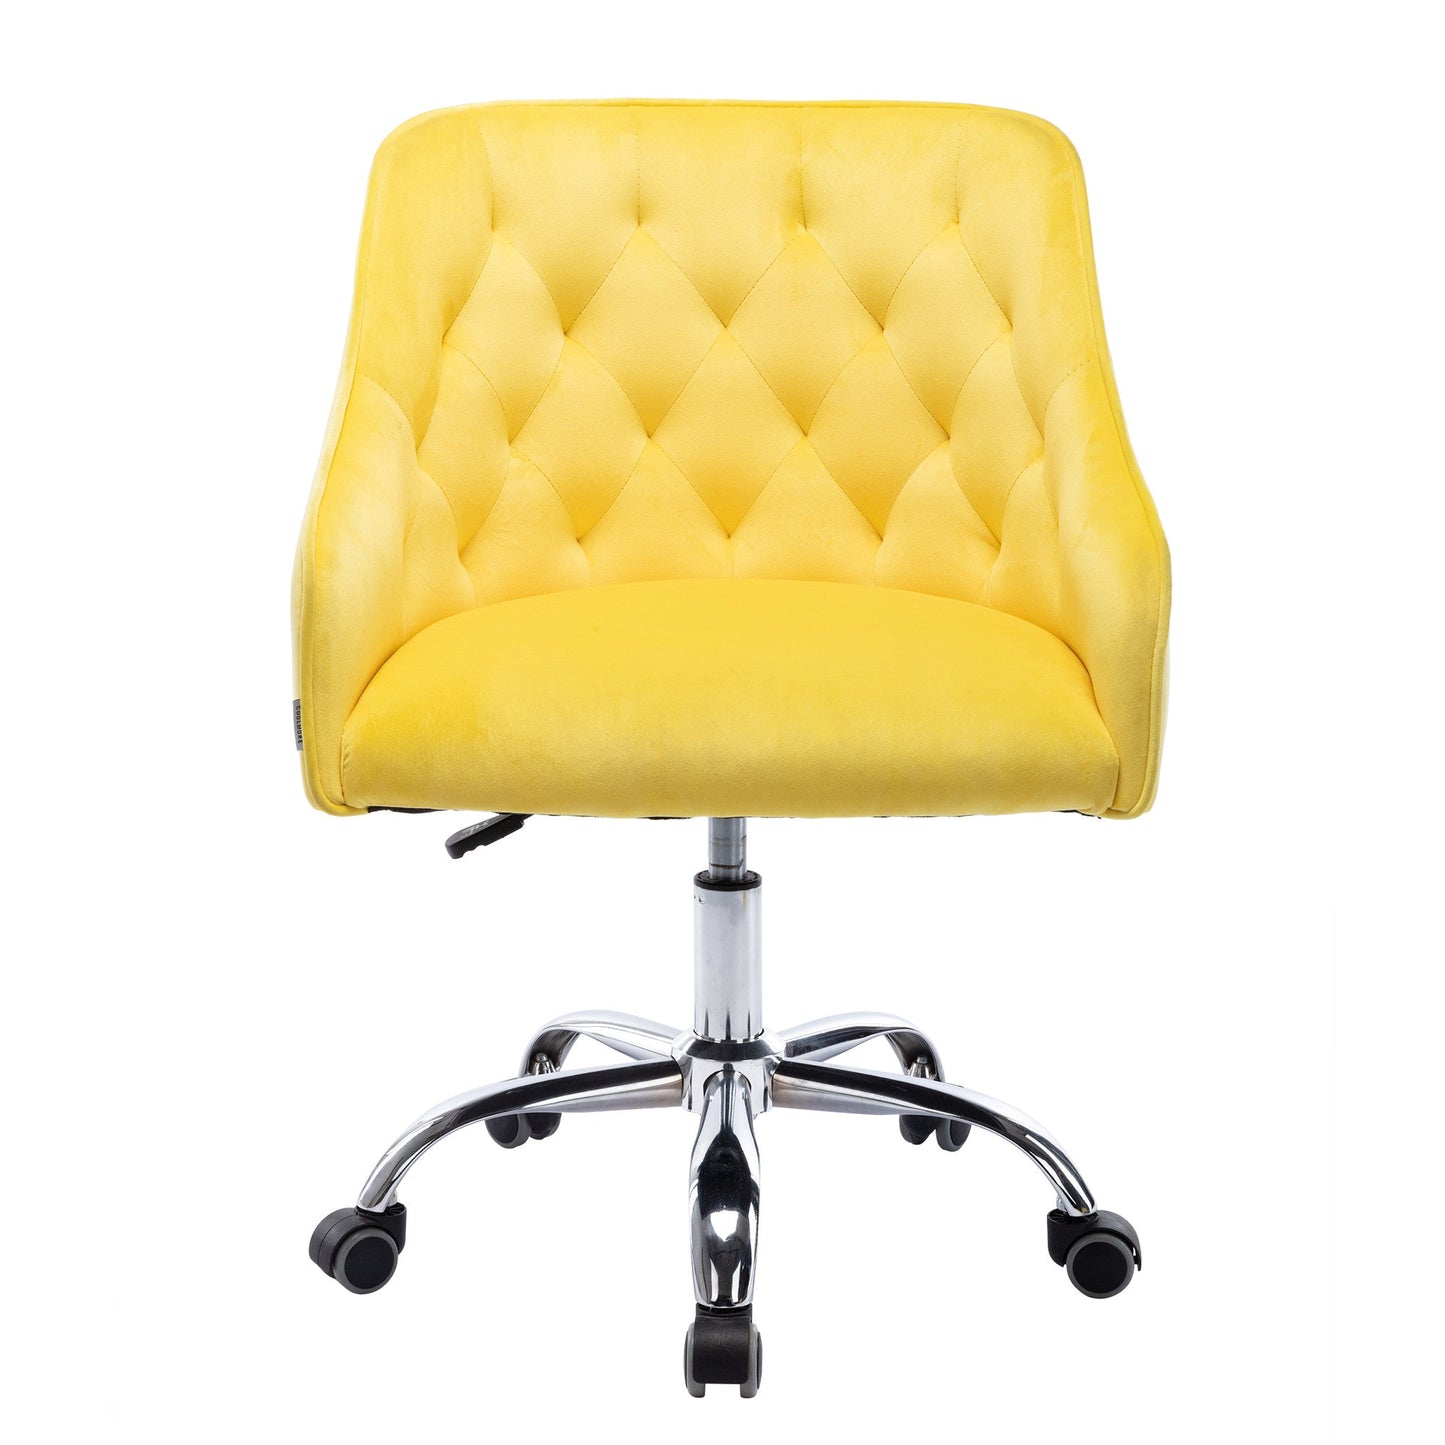 Swivel Shell Chair for Living Room/ Modern Leisure office Chair - Demine Essentials